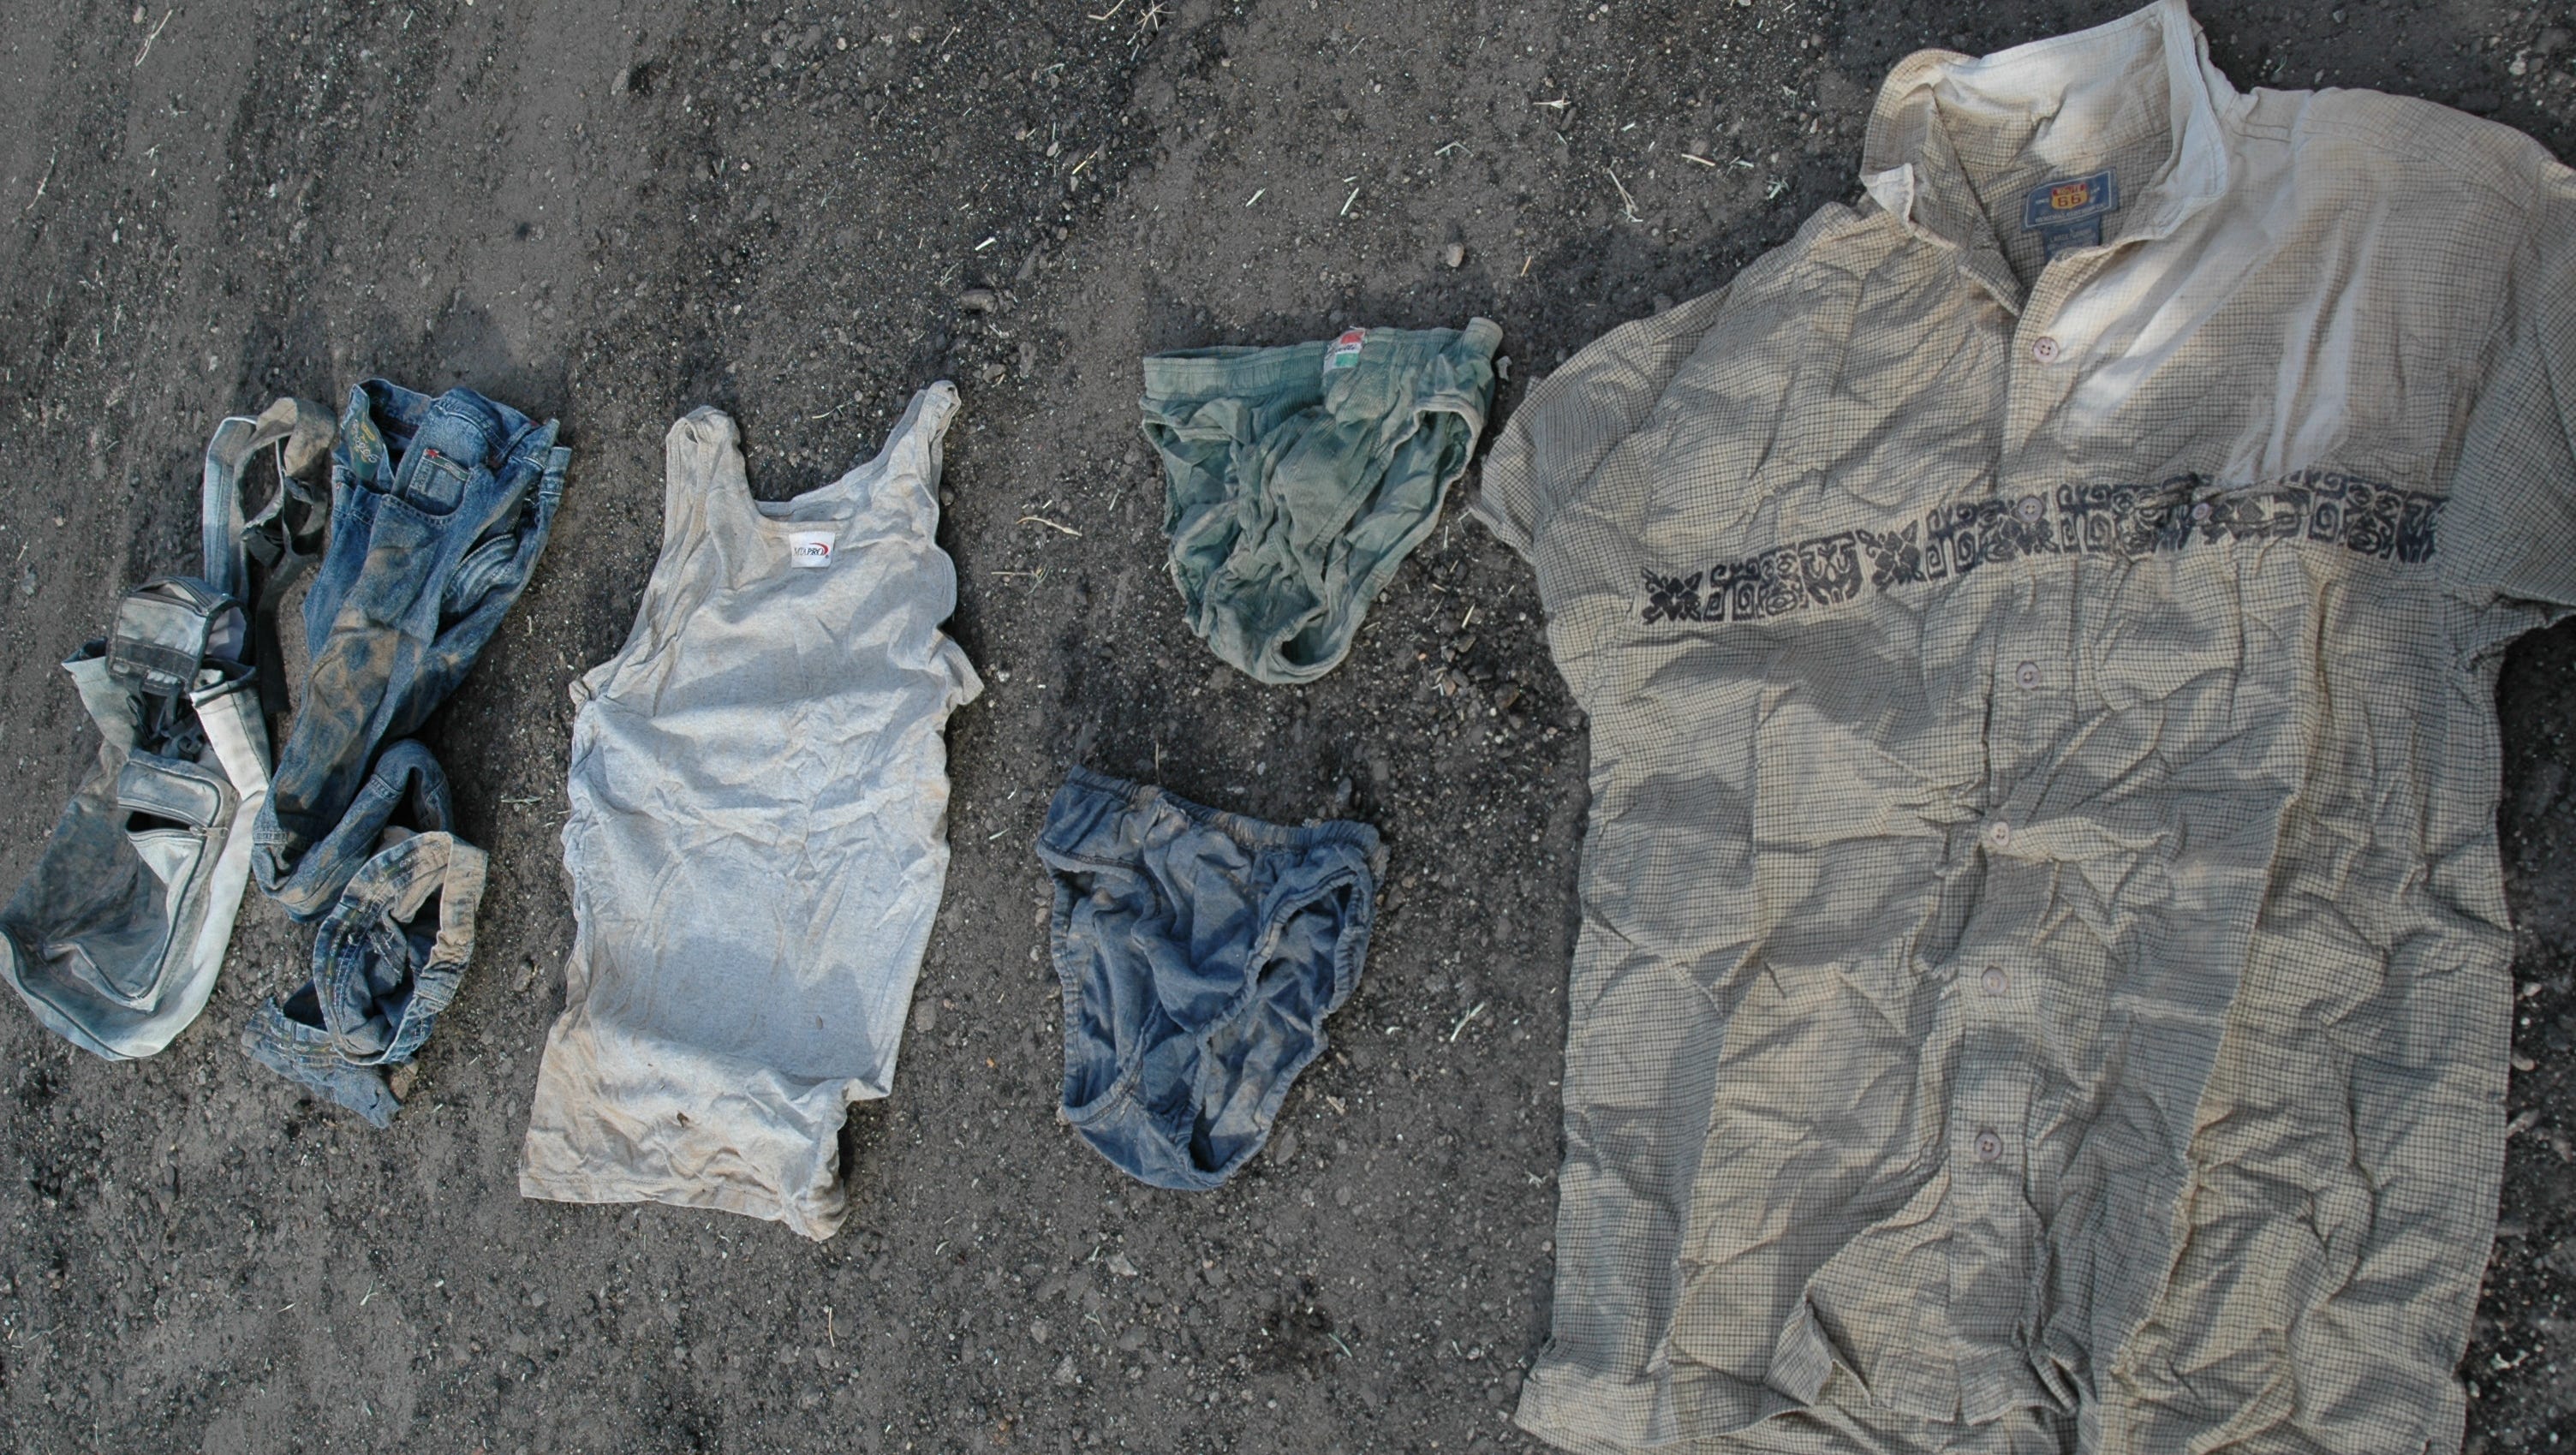 Clothing that was found with a man’s skeleton in the open desert near Winterhaven on Dec. 17, 2005. Photo from John Doe Case #05-234.